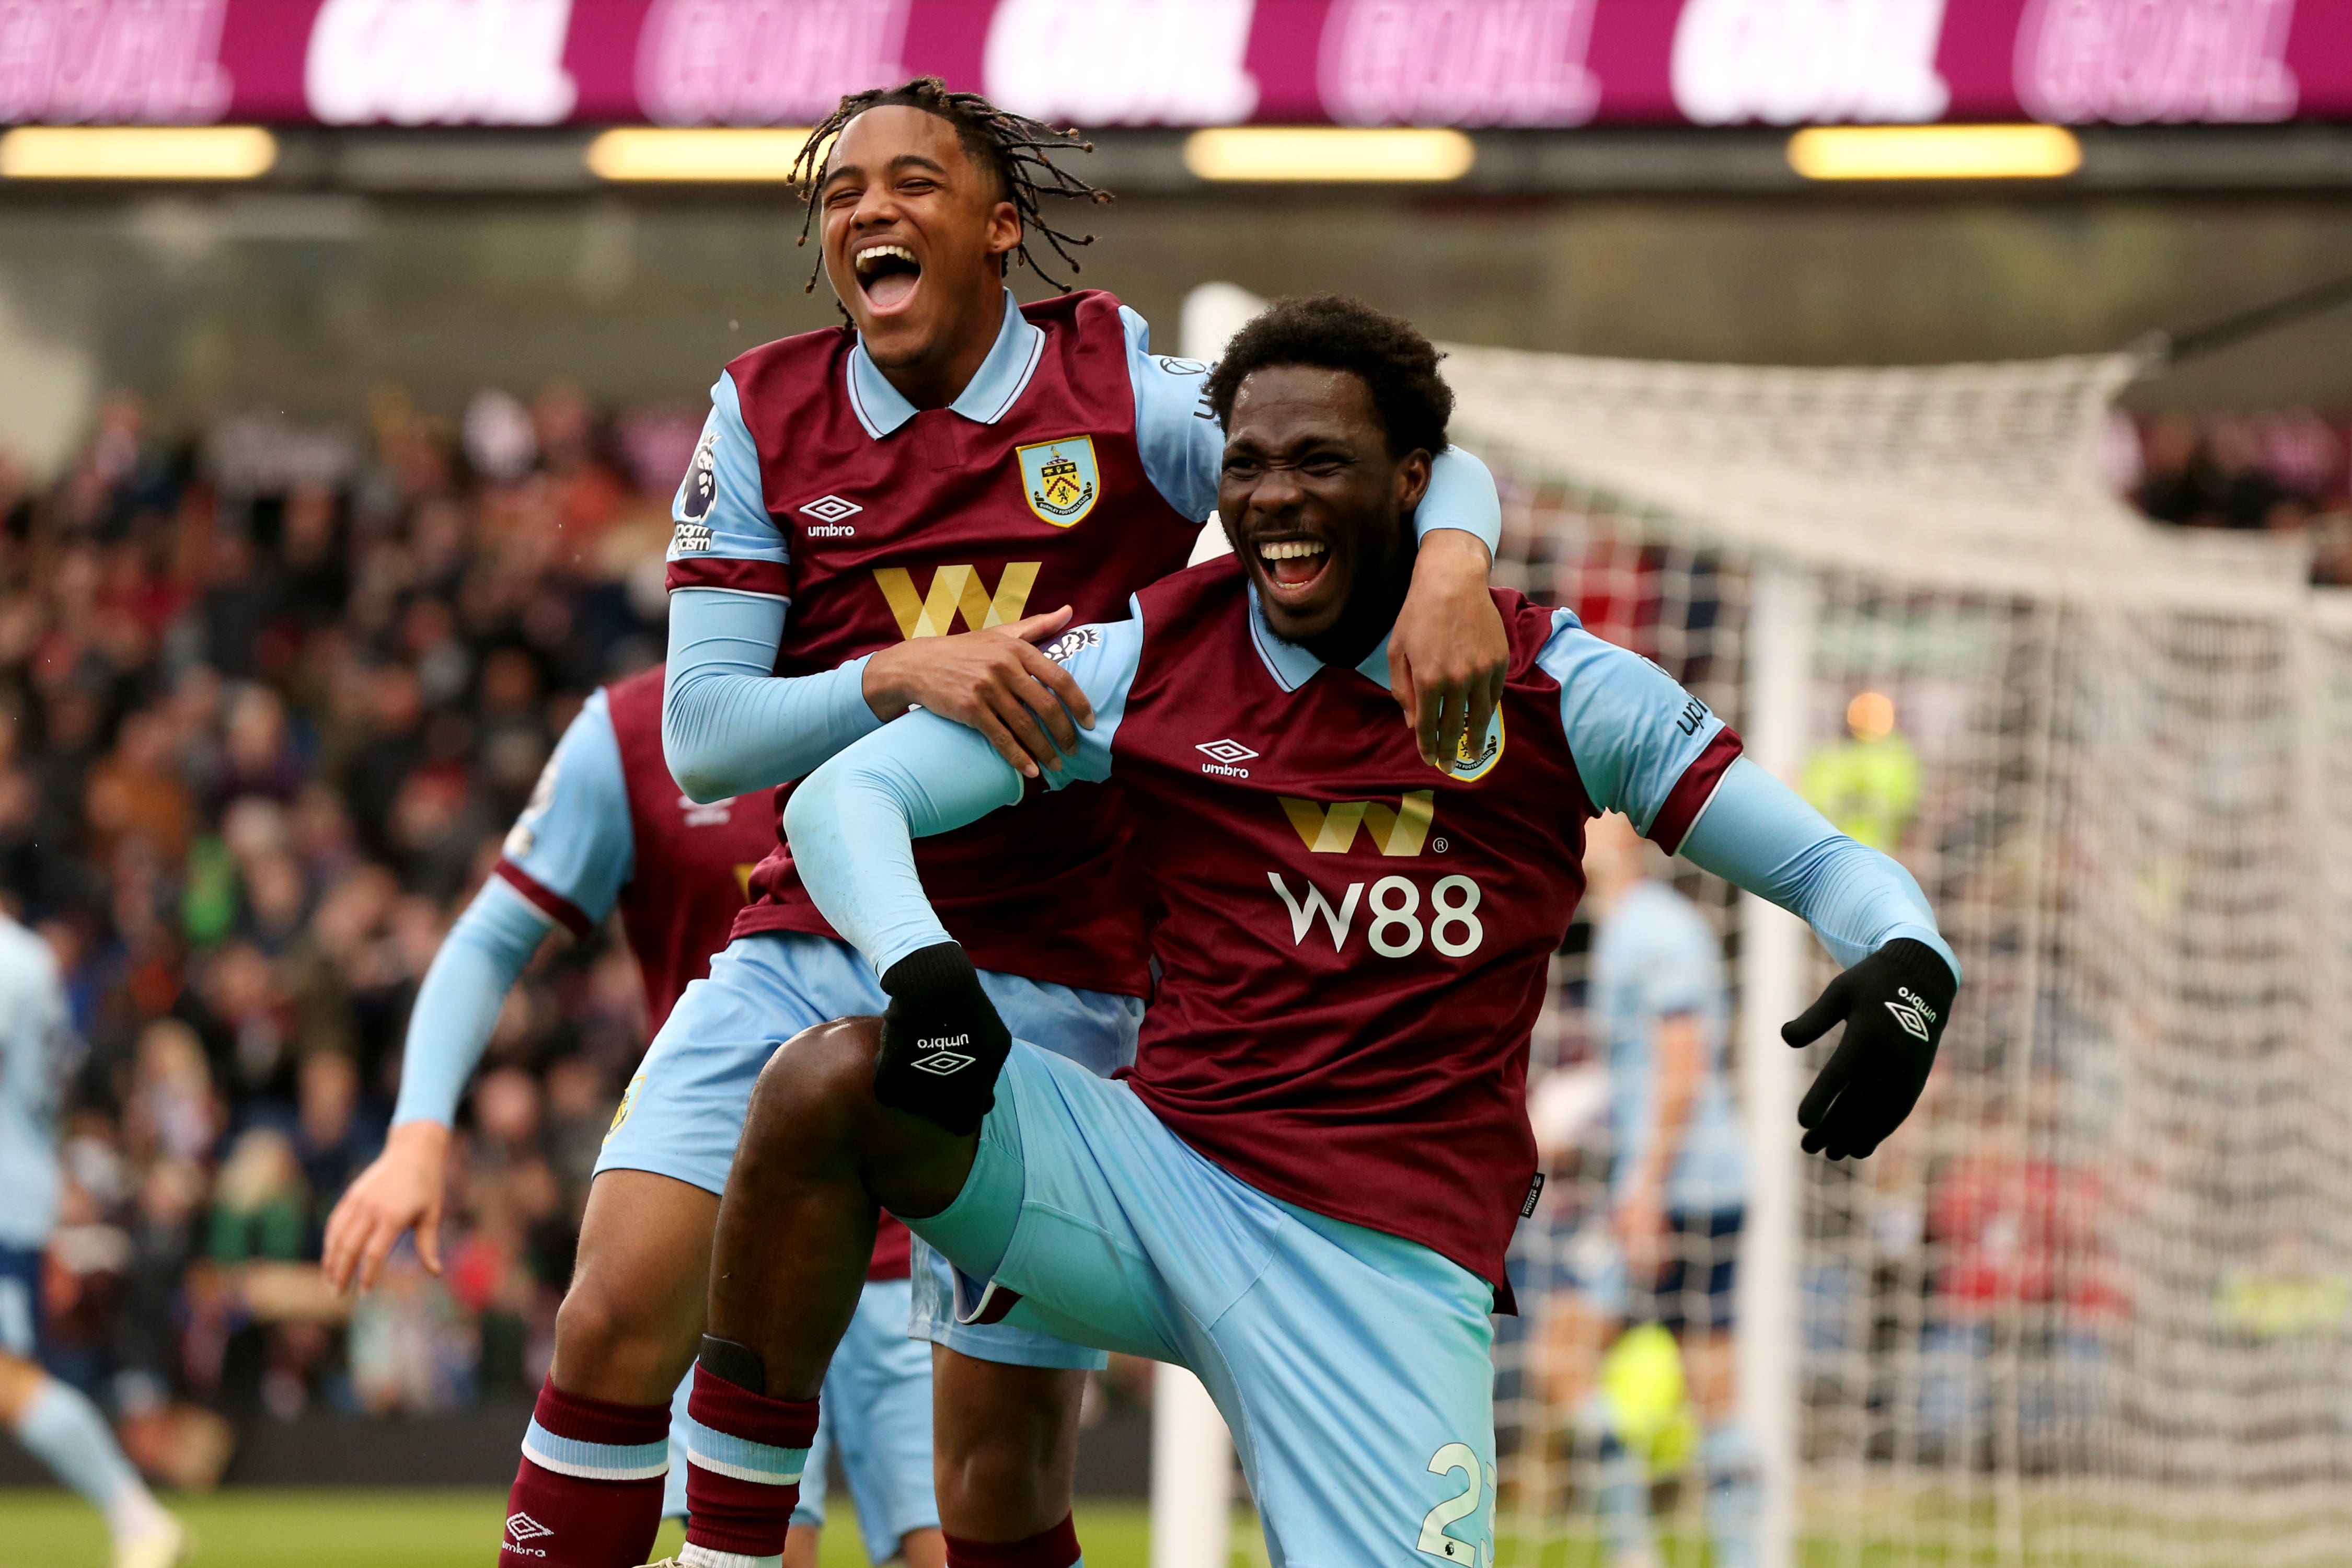 Burnley kept their survival hopes alive with a 2-1 win over Brentford